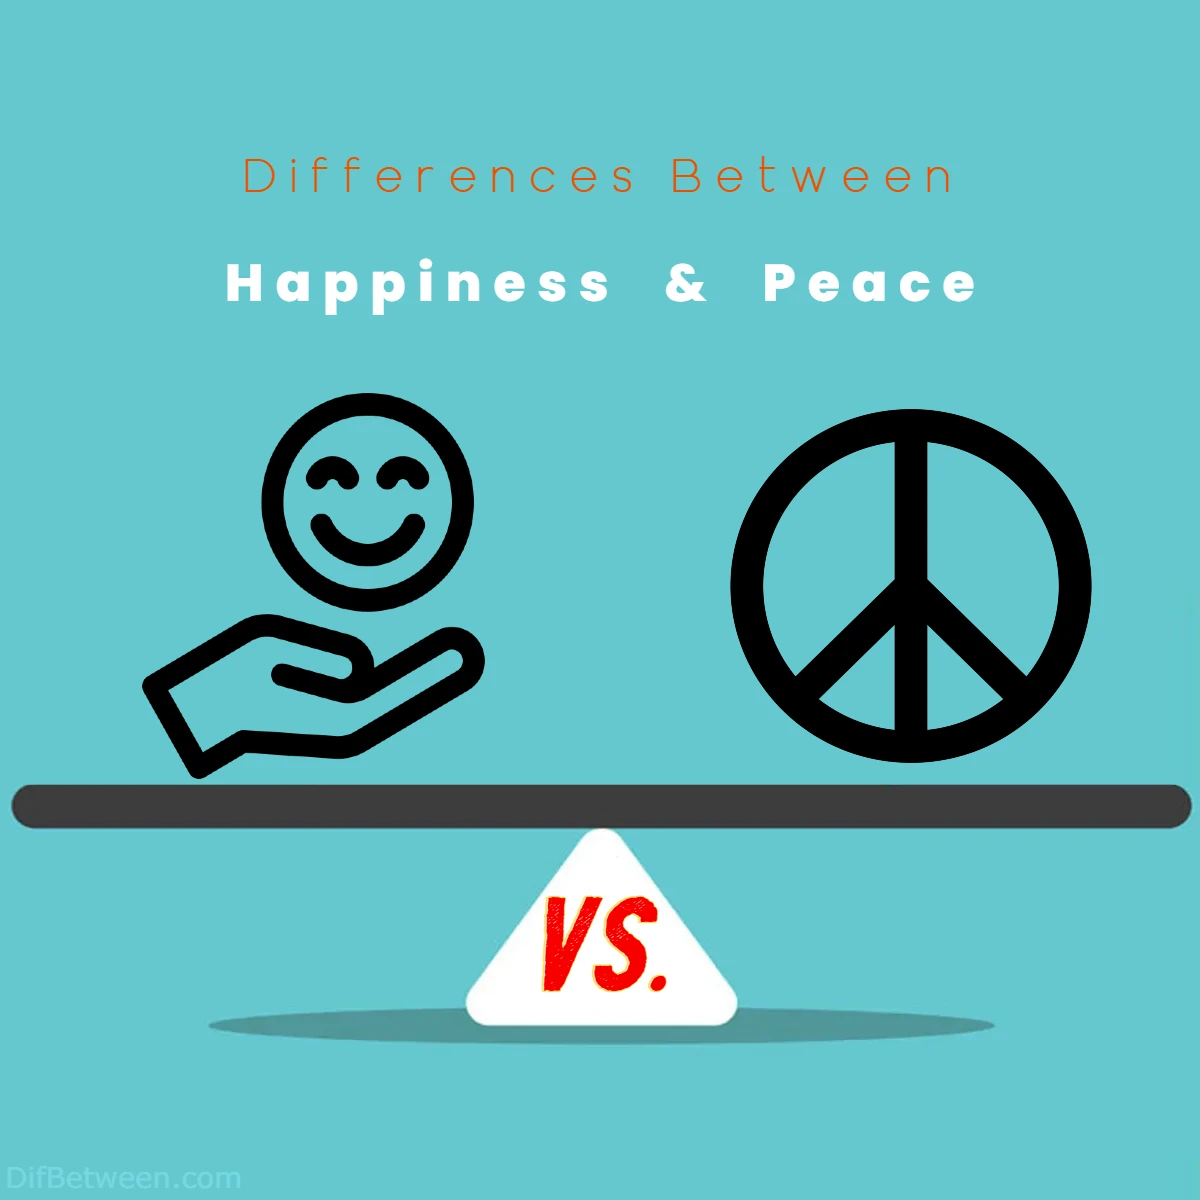 Differences Between Happiness vs Peace